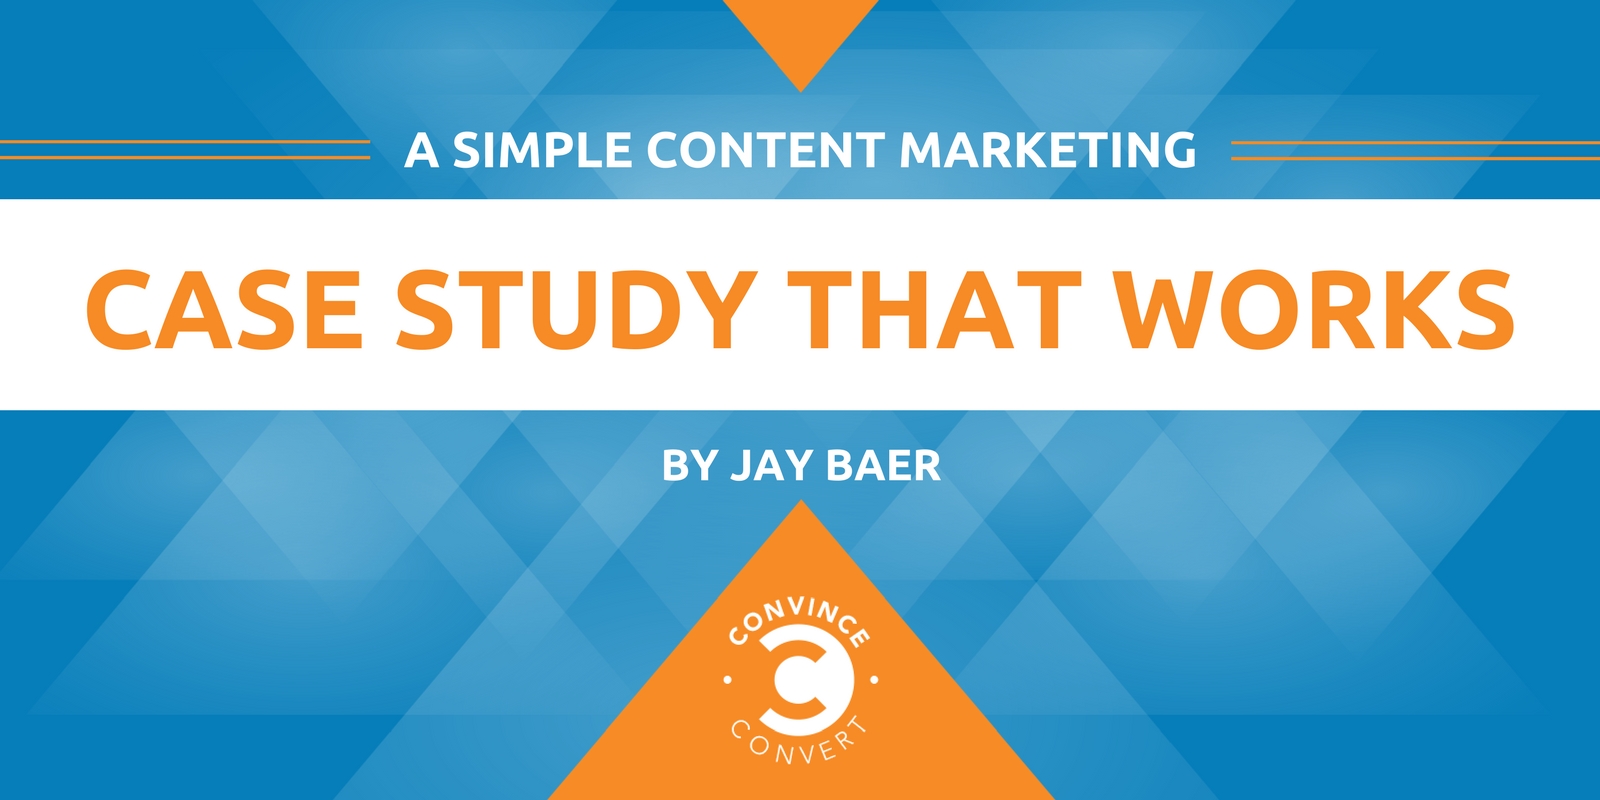 A Simple Content Marketing Case Study That Works